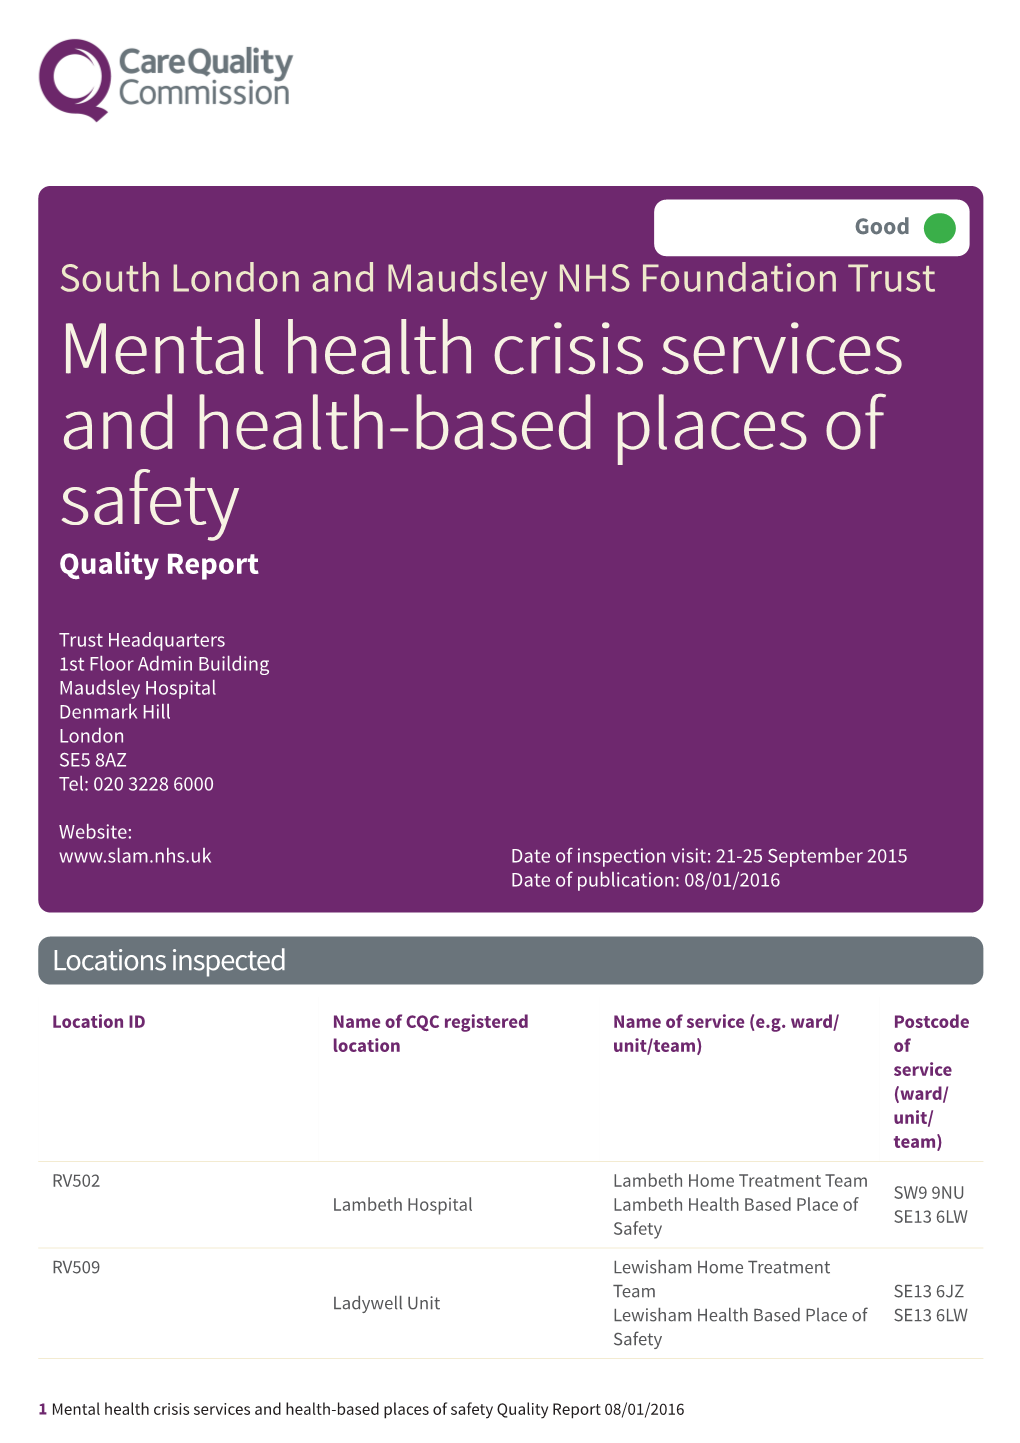 Mental Health Crisis Services and Health-Based Places of Safety Quality Report